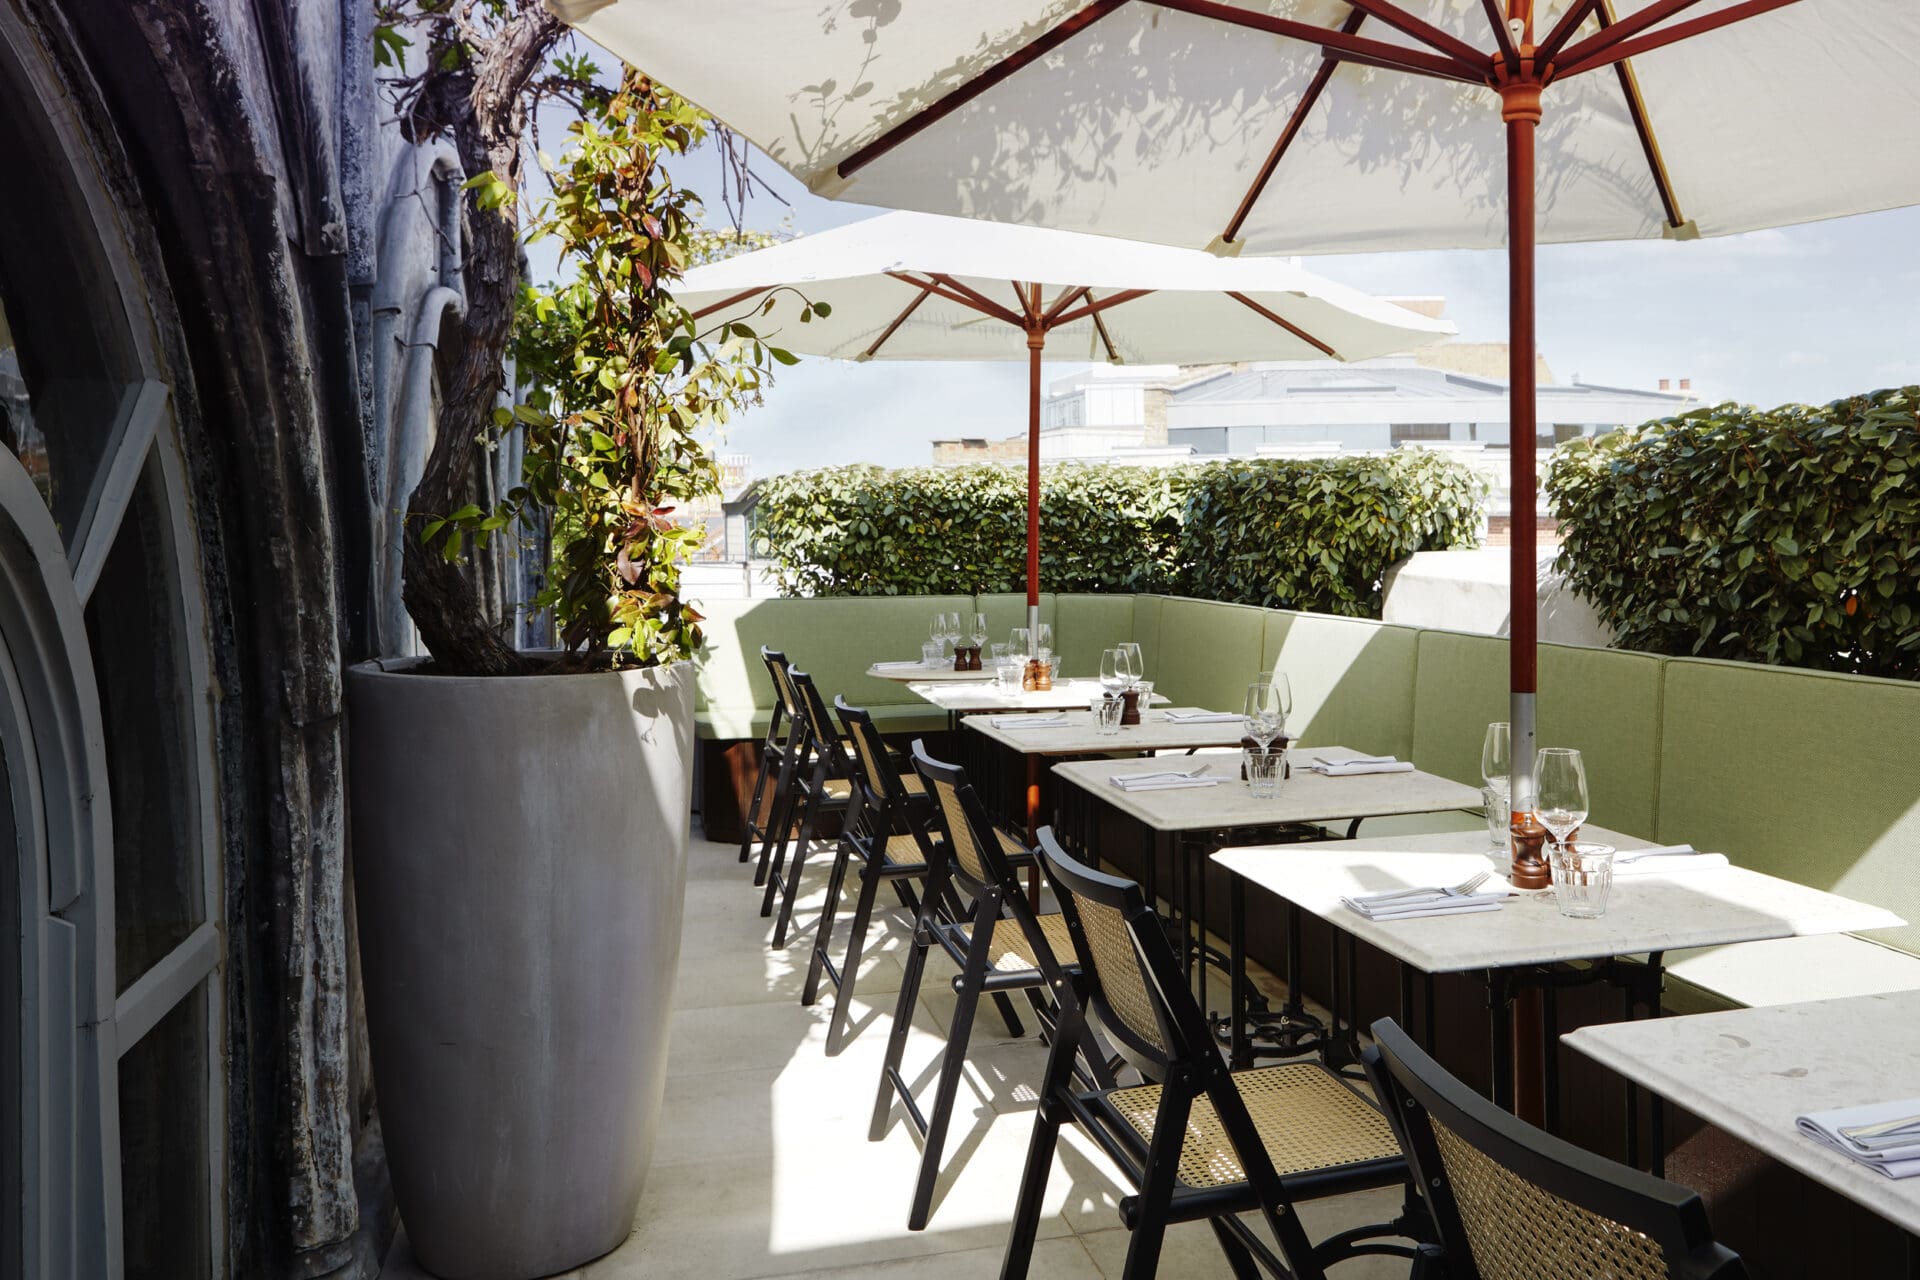 Best outdoor restaurants London | The rooftop at Sessions Arts Club, with a row of tables and chairs under white umbrellas and with light-green cushions